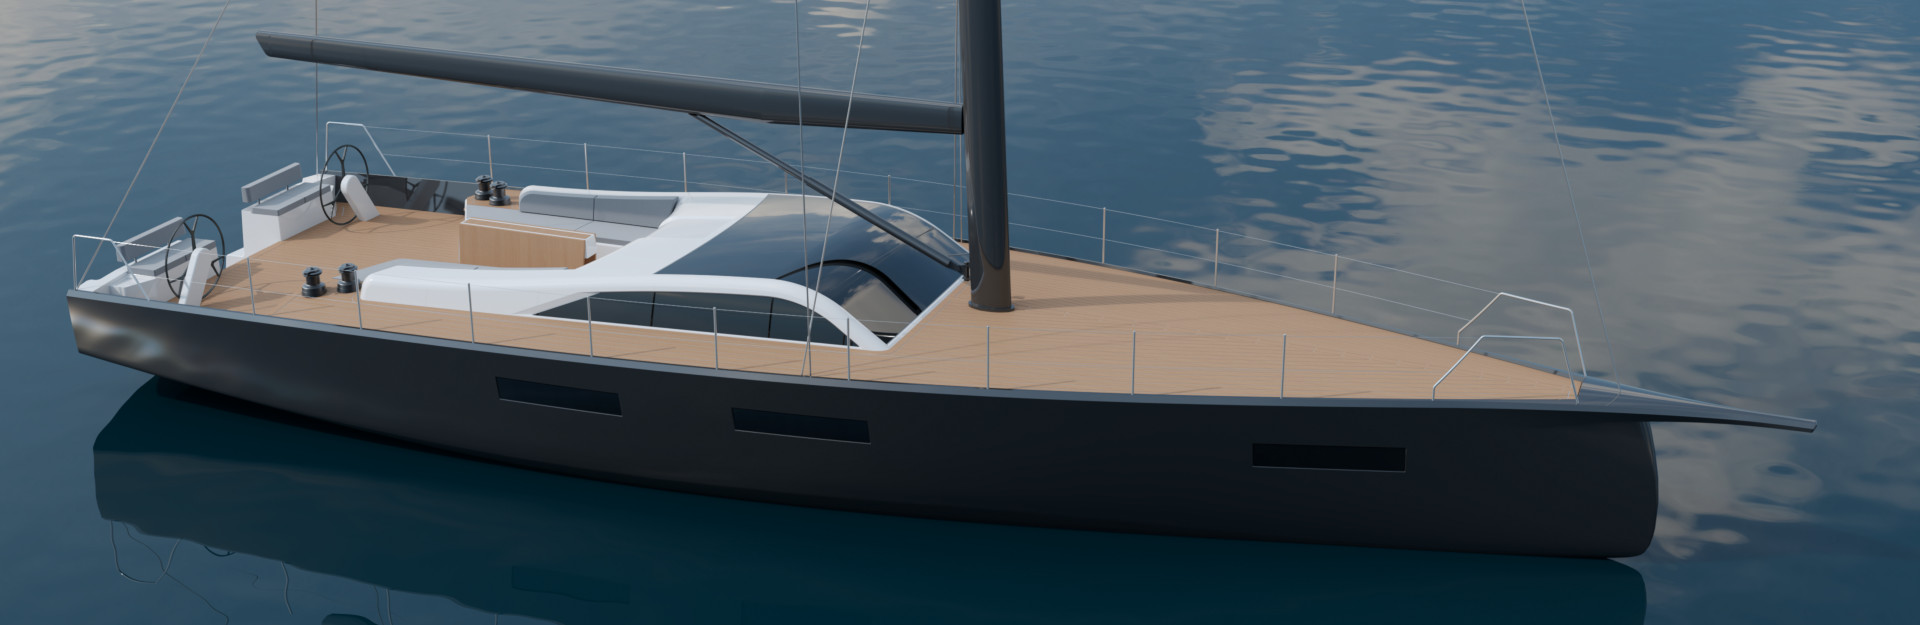 Yacht 3D Modeling with Rhino – Levels 1 & 2